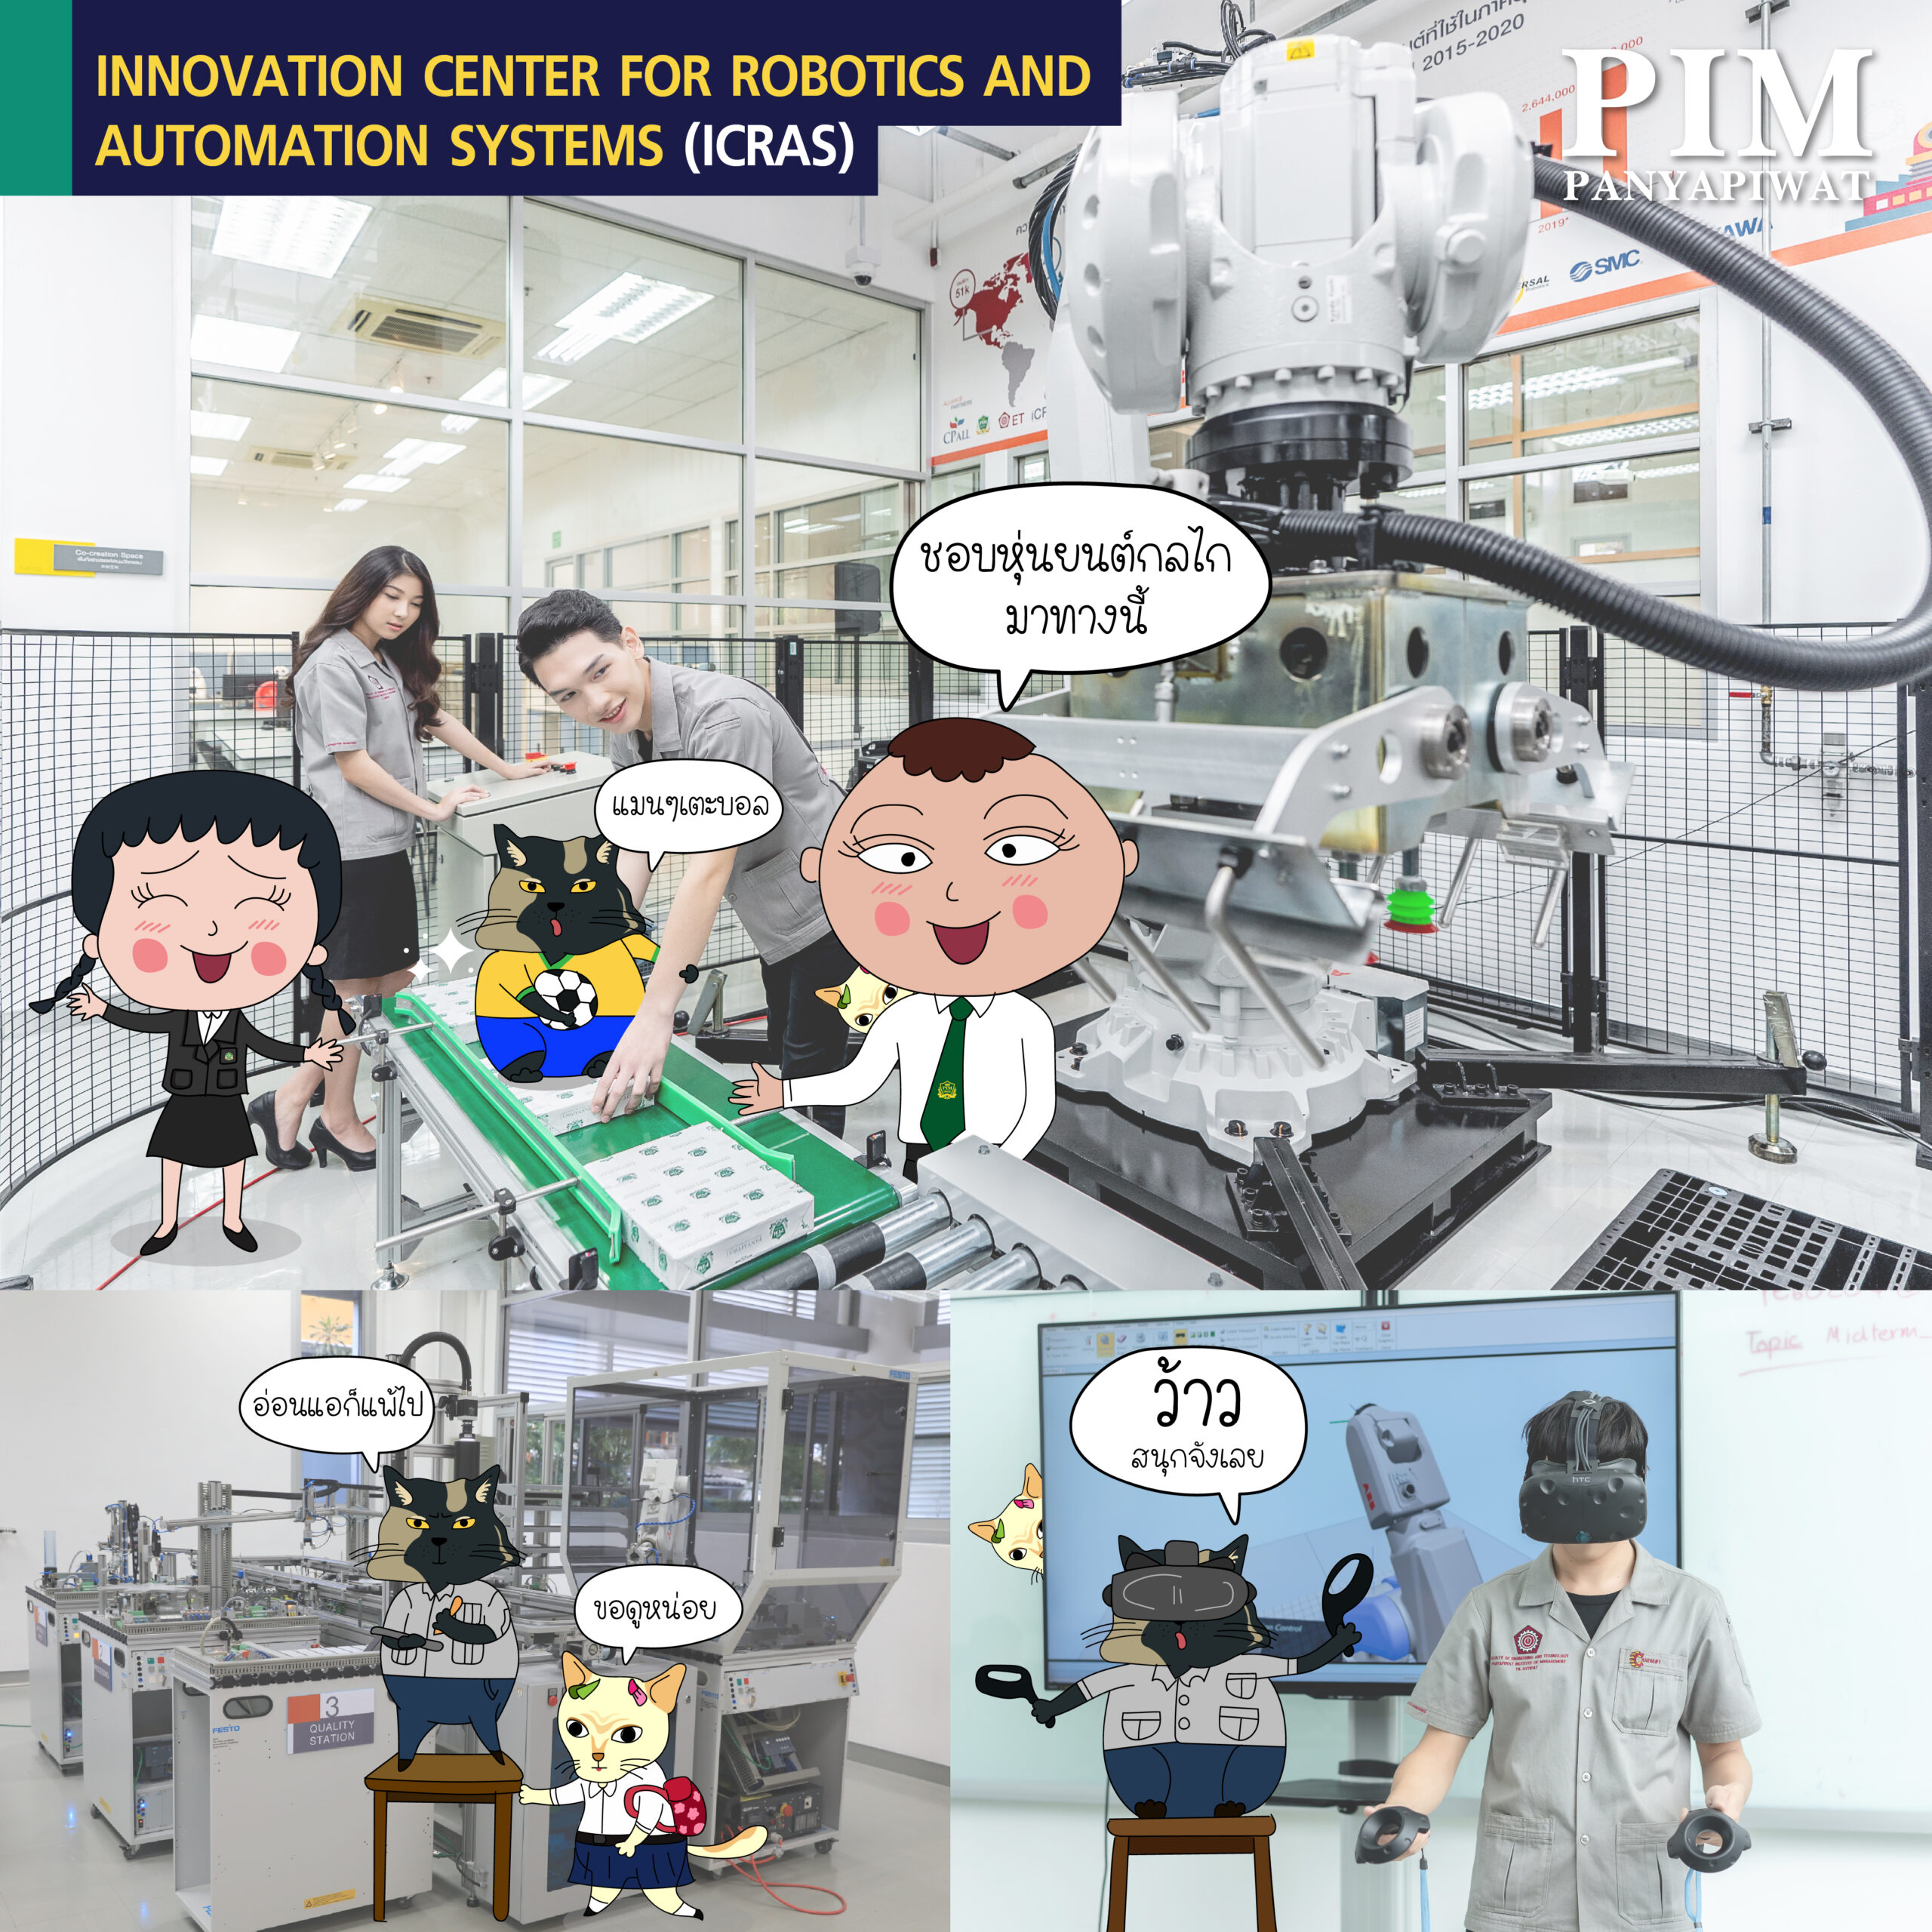 INNOVATION CENTER FOR ROBOTICS AND AUTOMATION SYSTEMS (ICRAS)